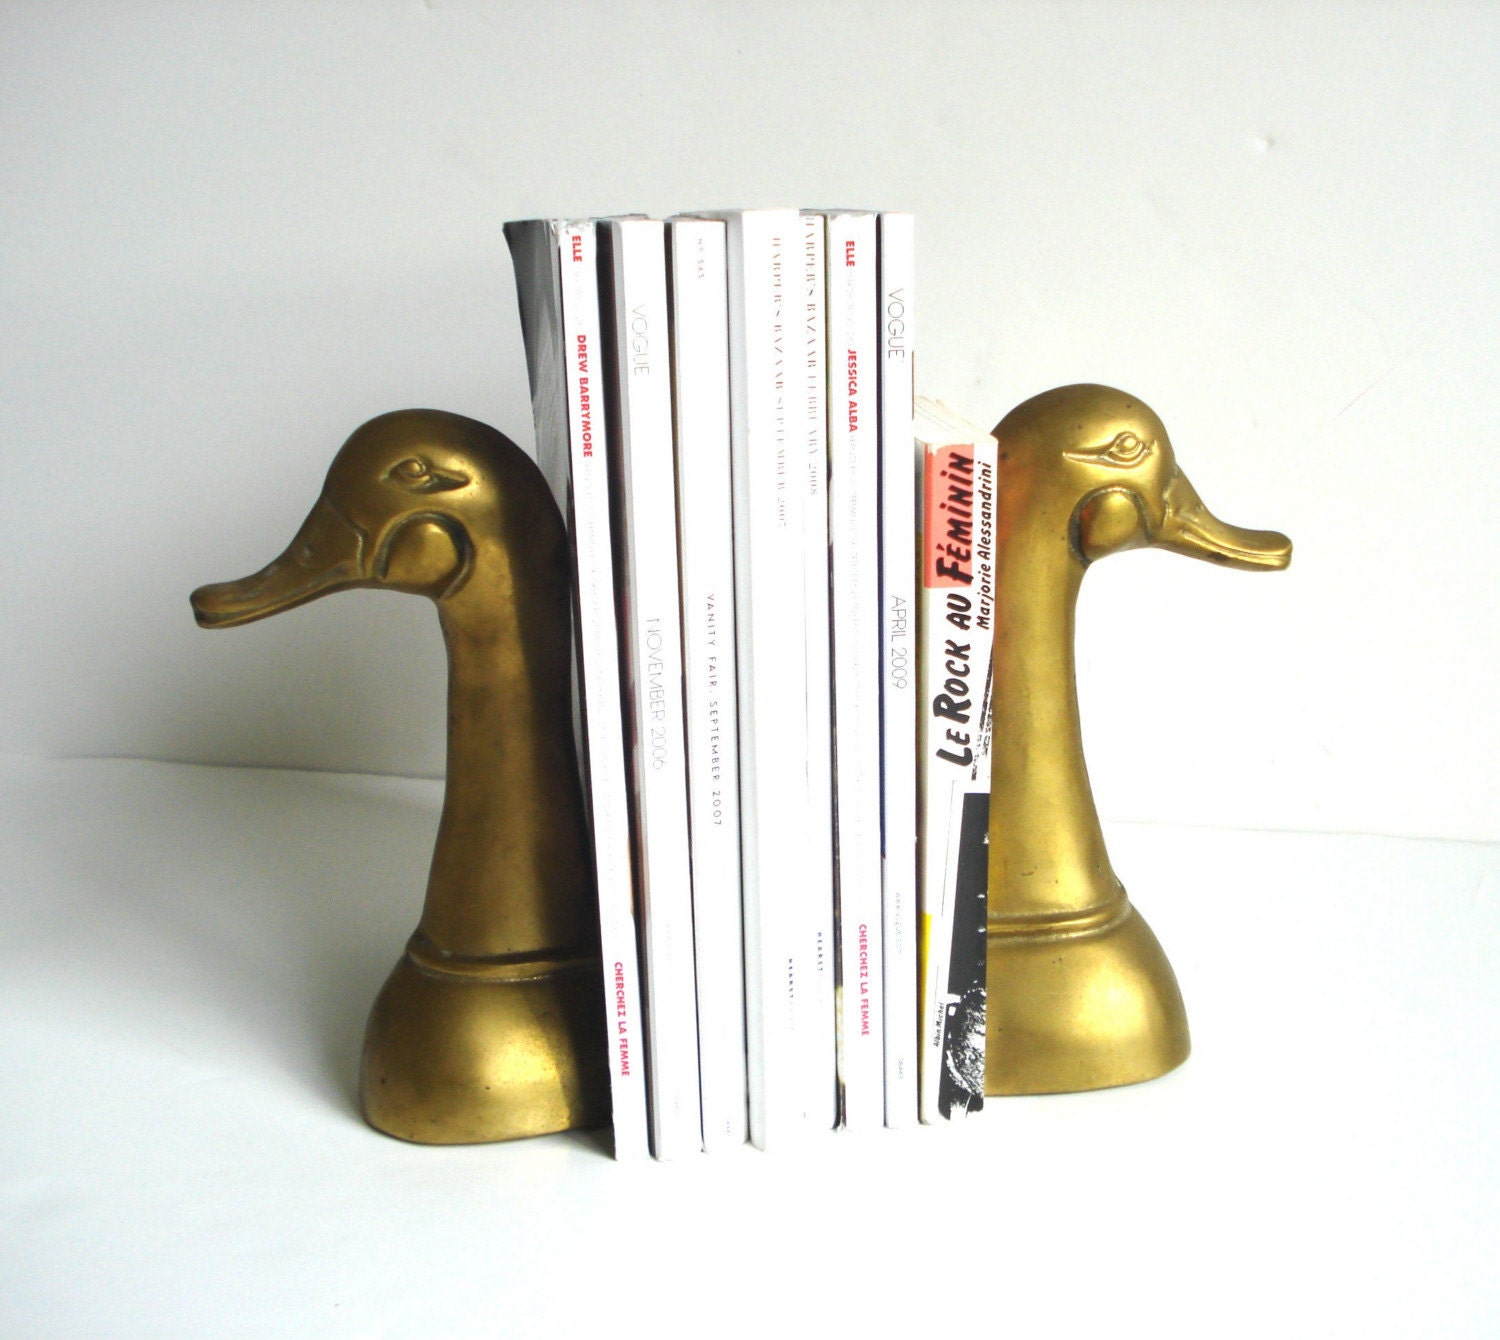 brass bookends marked with t